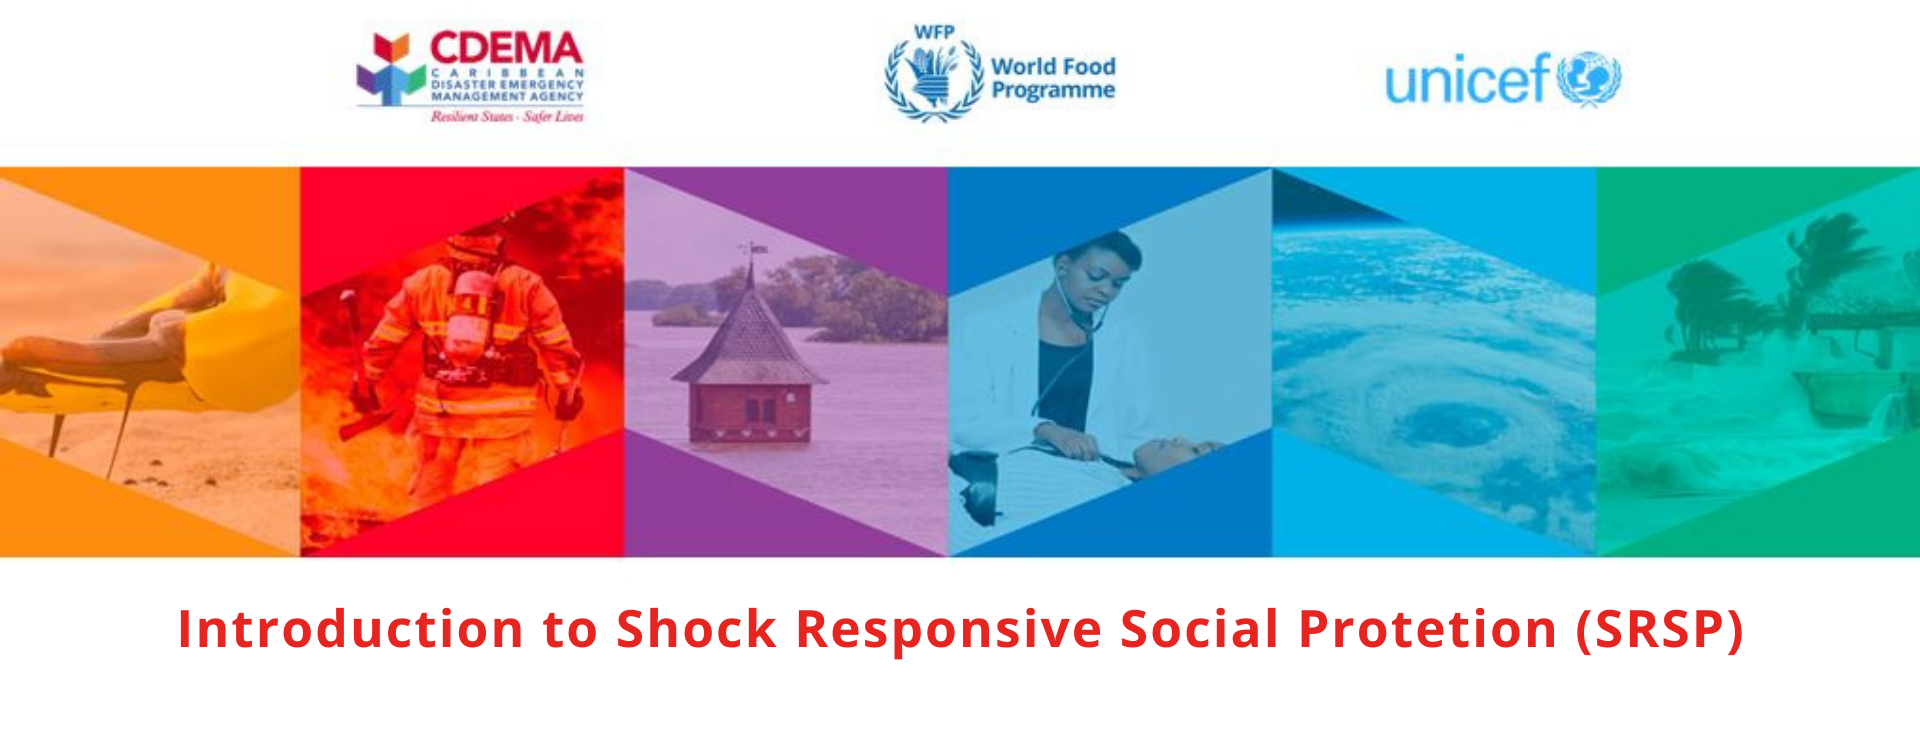 Introduction to Shock Responsive Social Protection (SRSP)